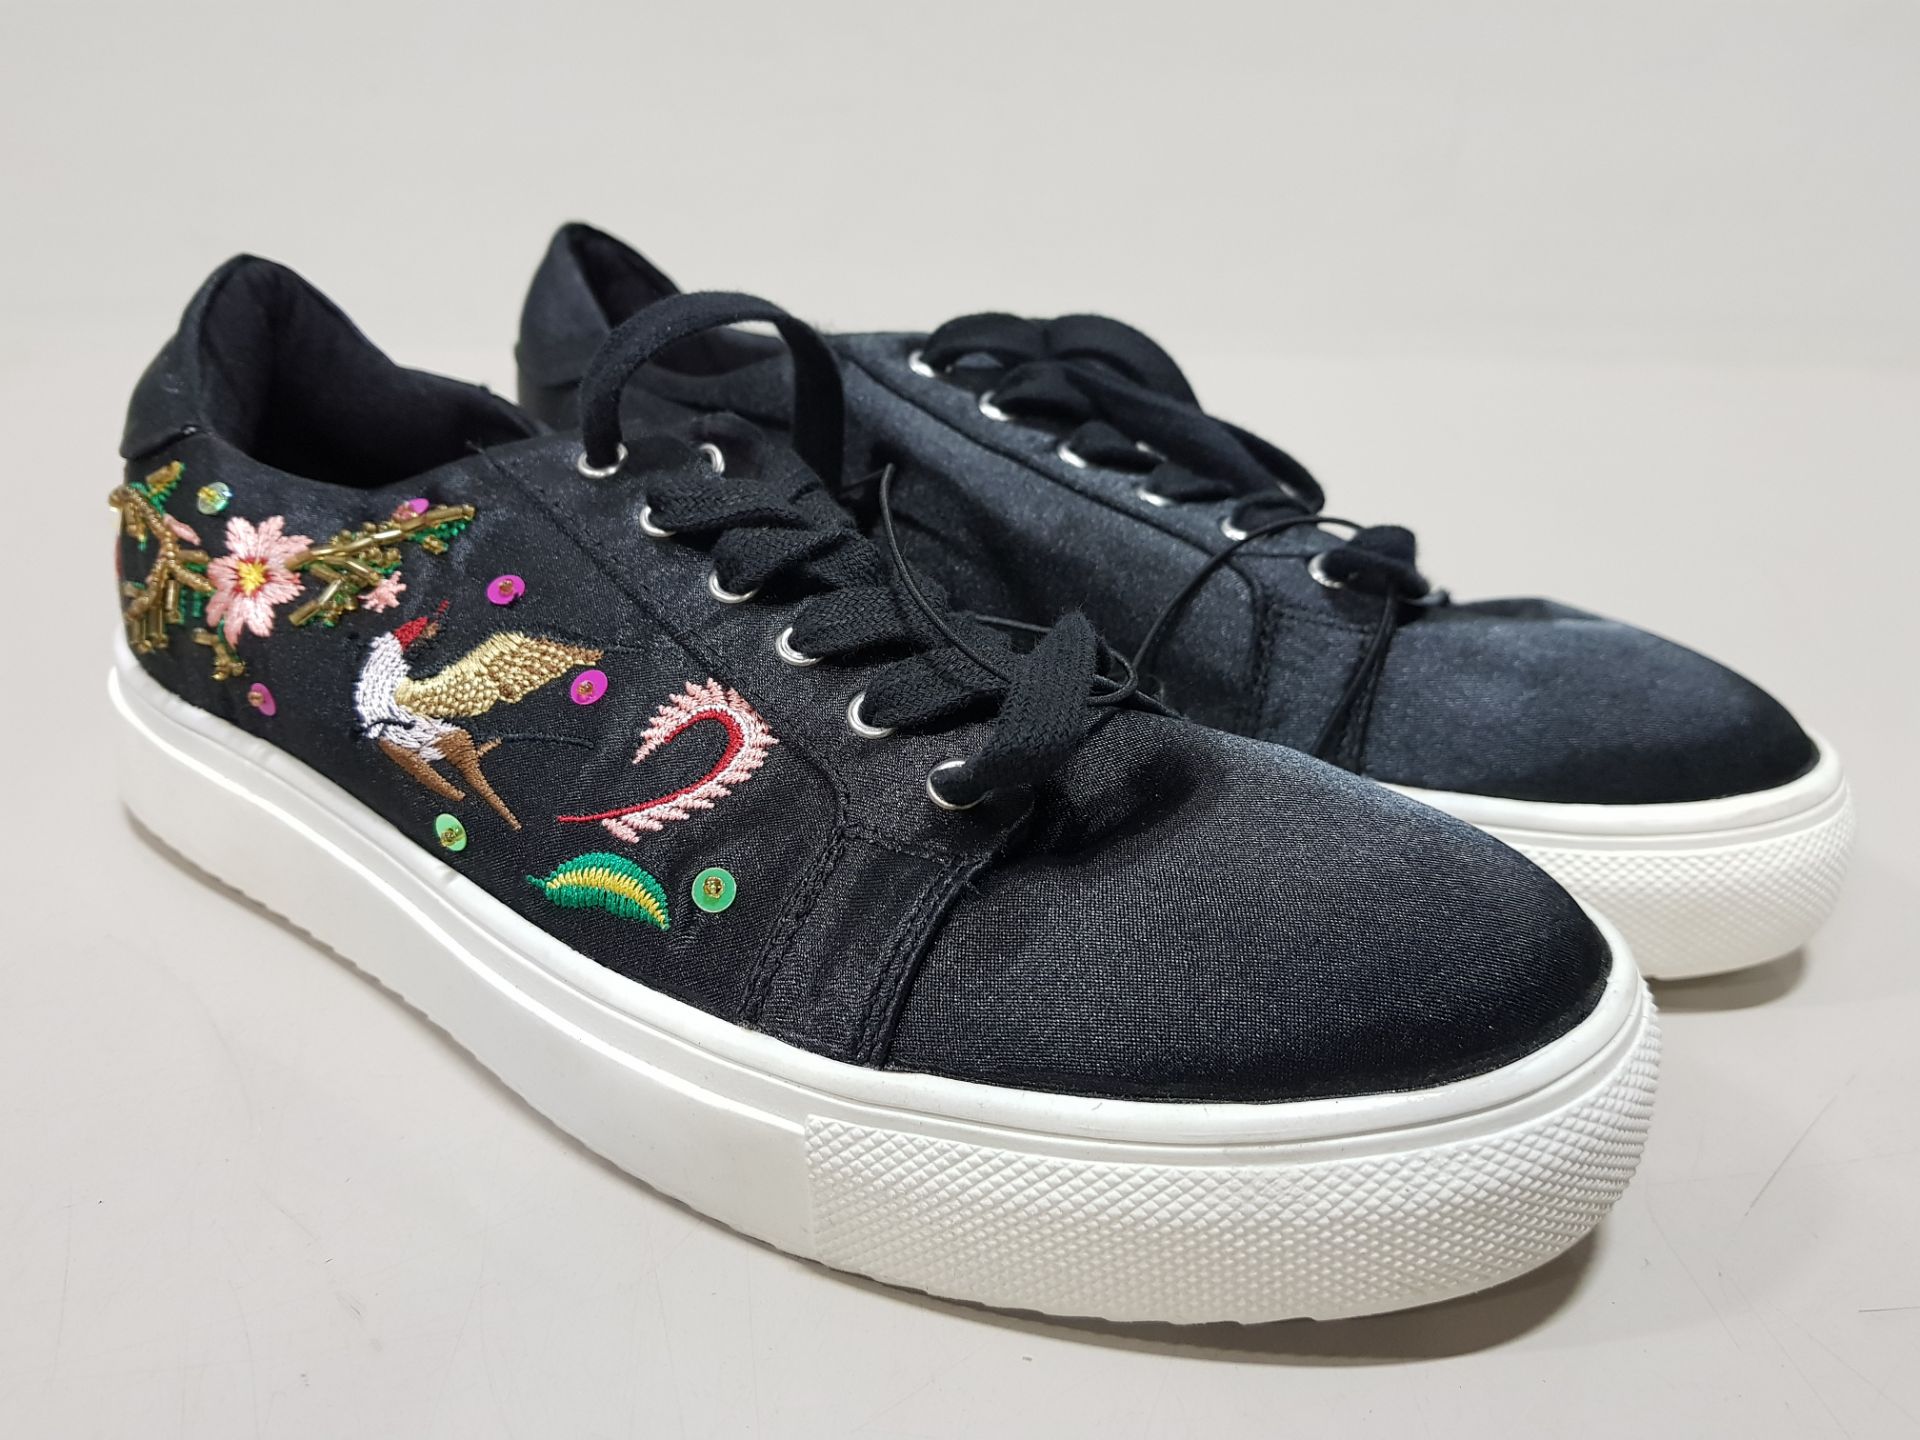 15 X PEACOCKS EMBROIDERED PRINT SHOES